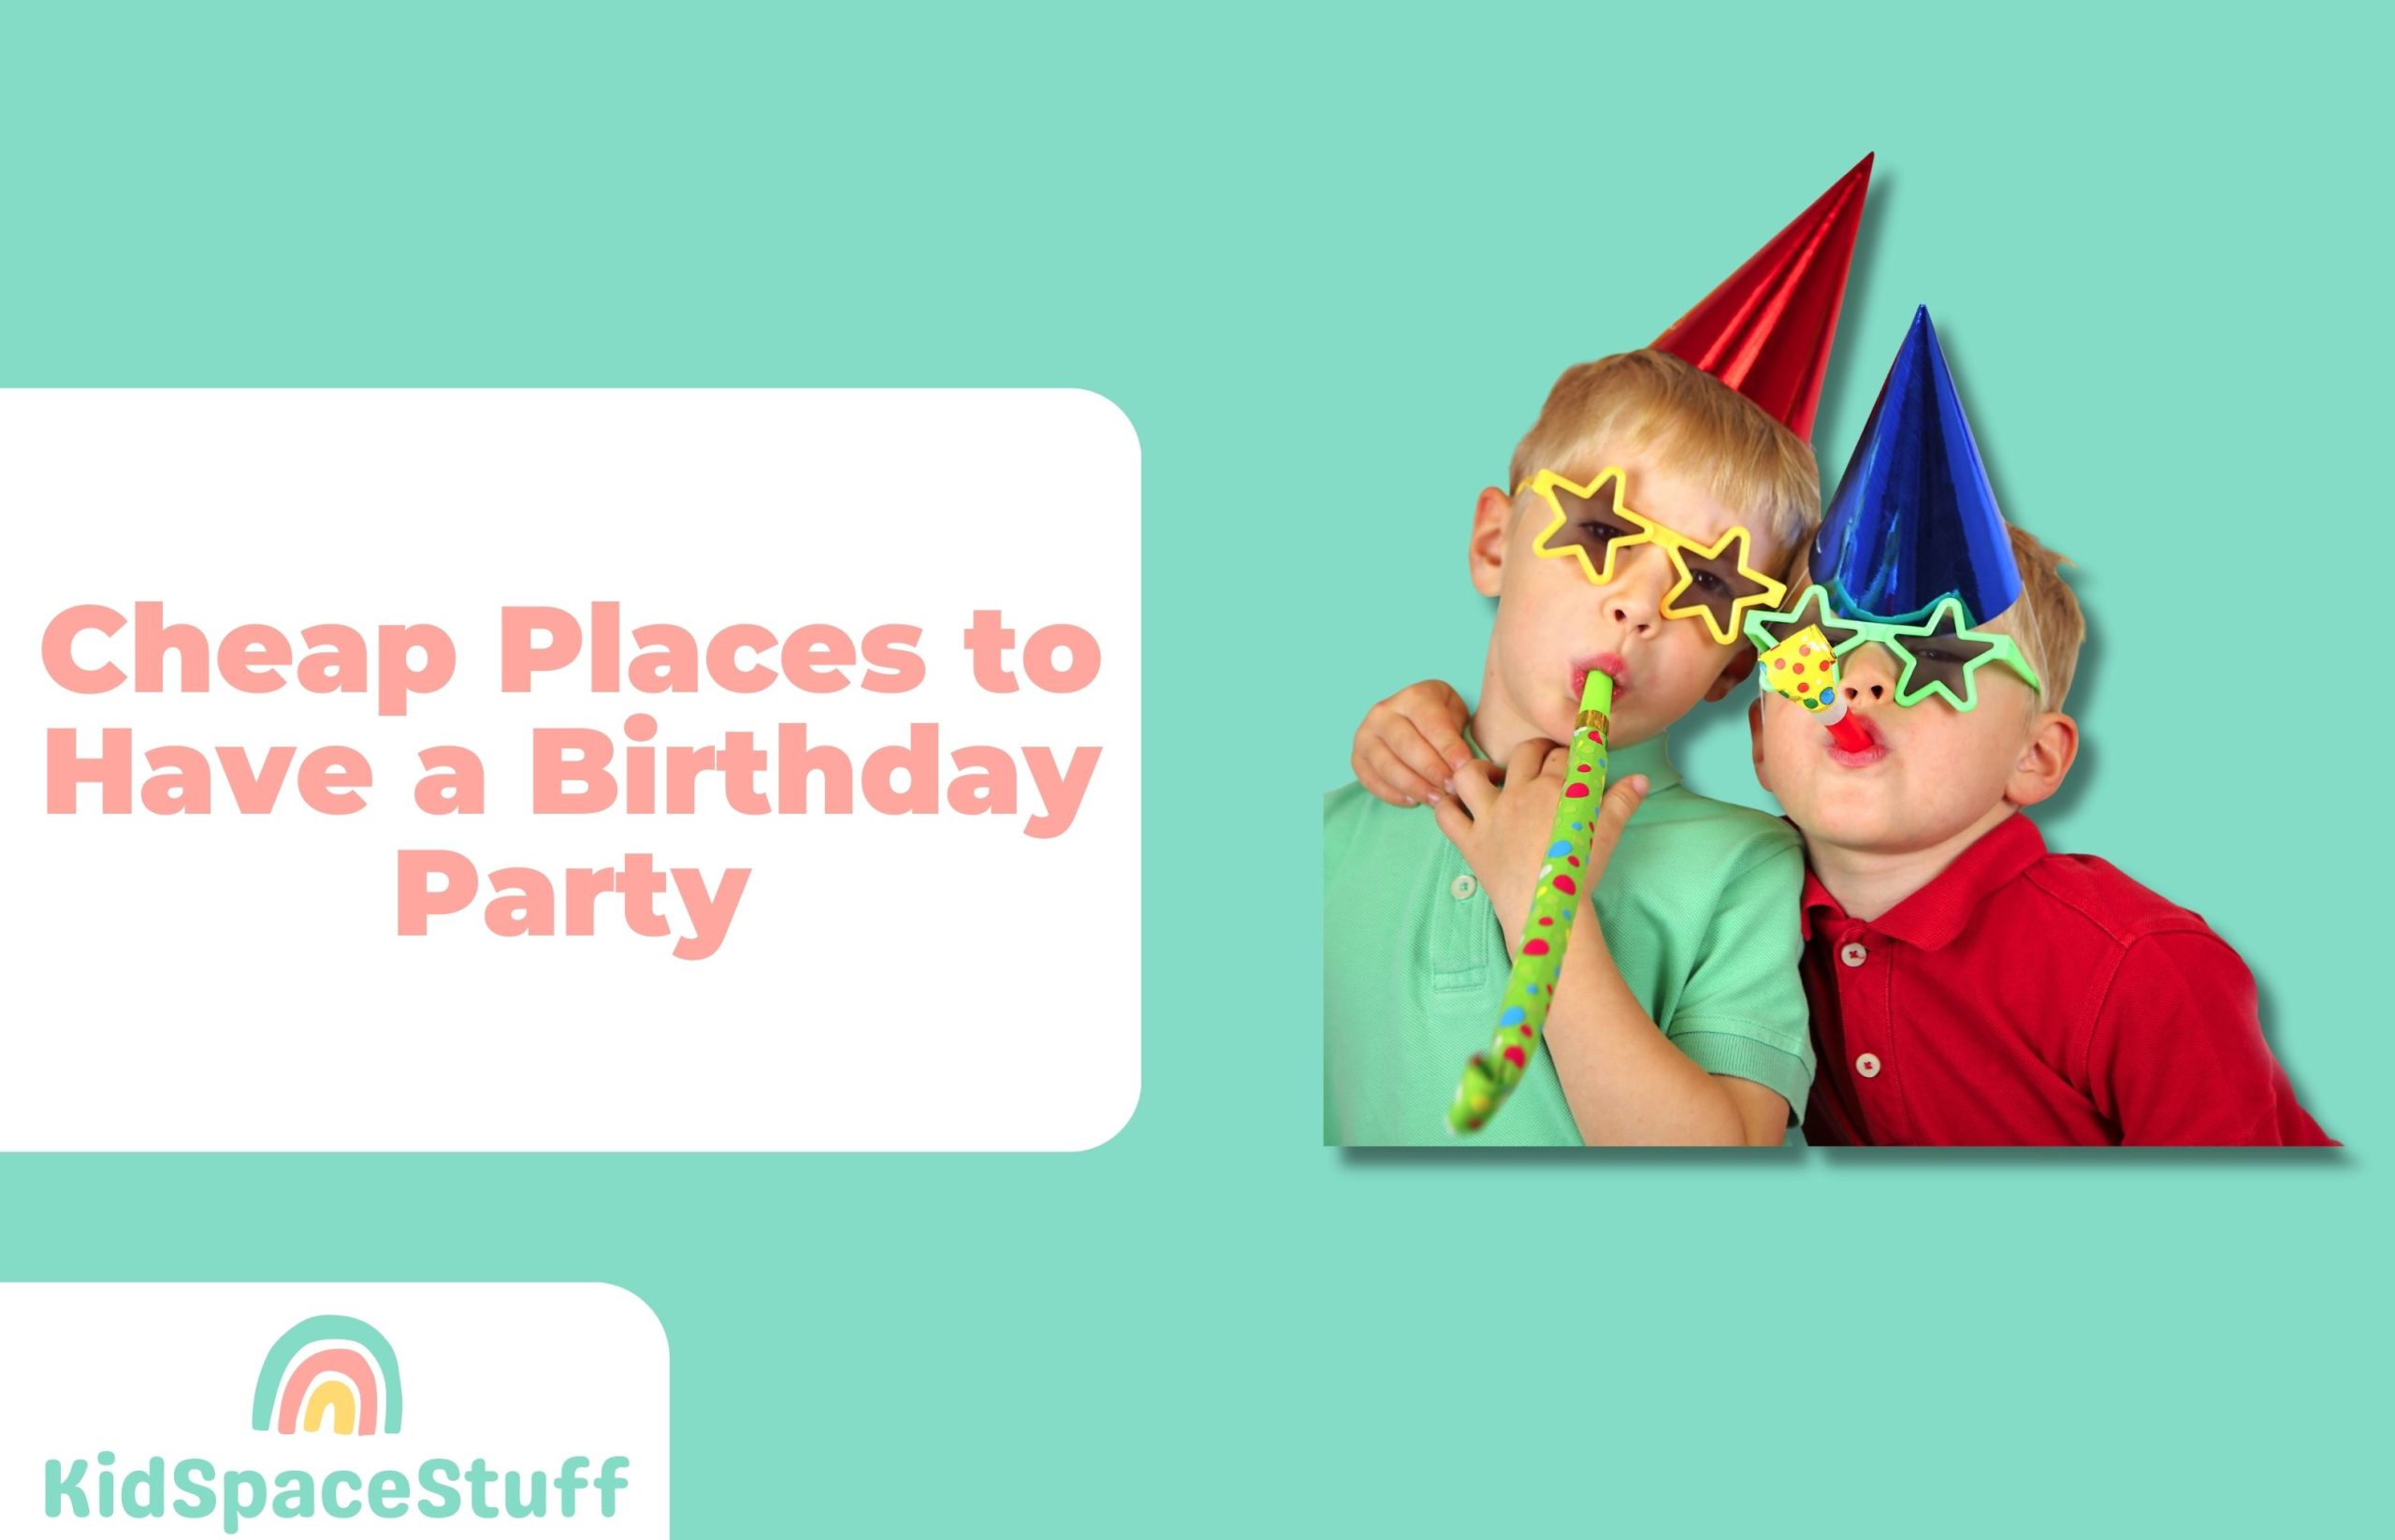 10 Cheap Places to Have a Birthday Party (For Anyone!)